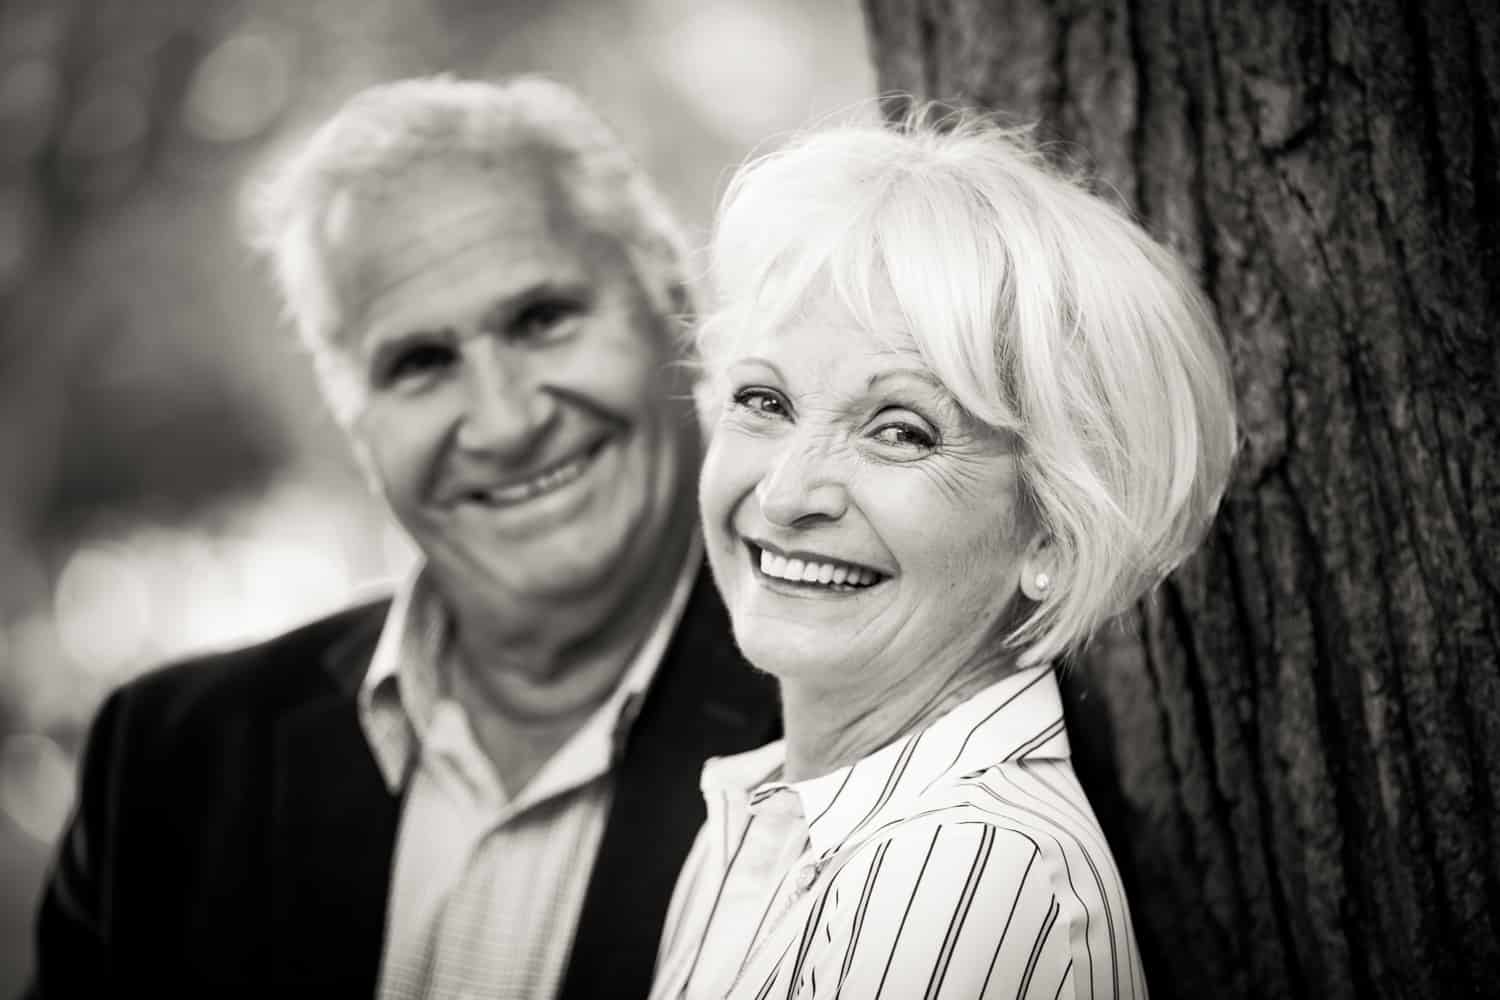 Black and white photo of older couple